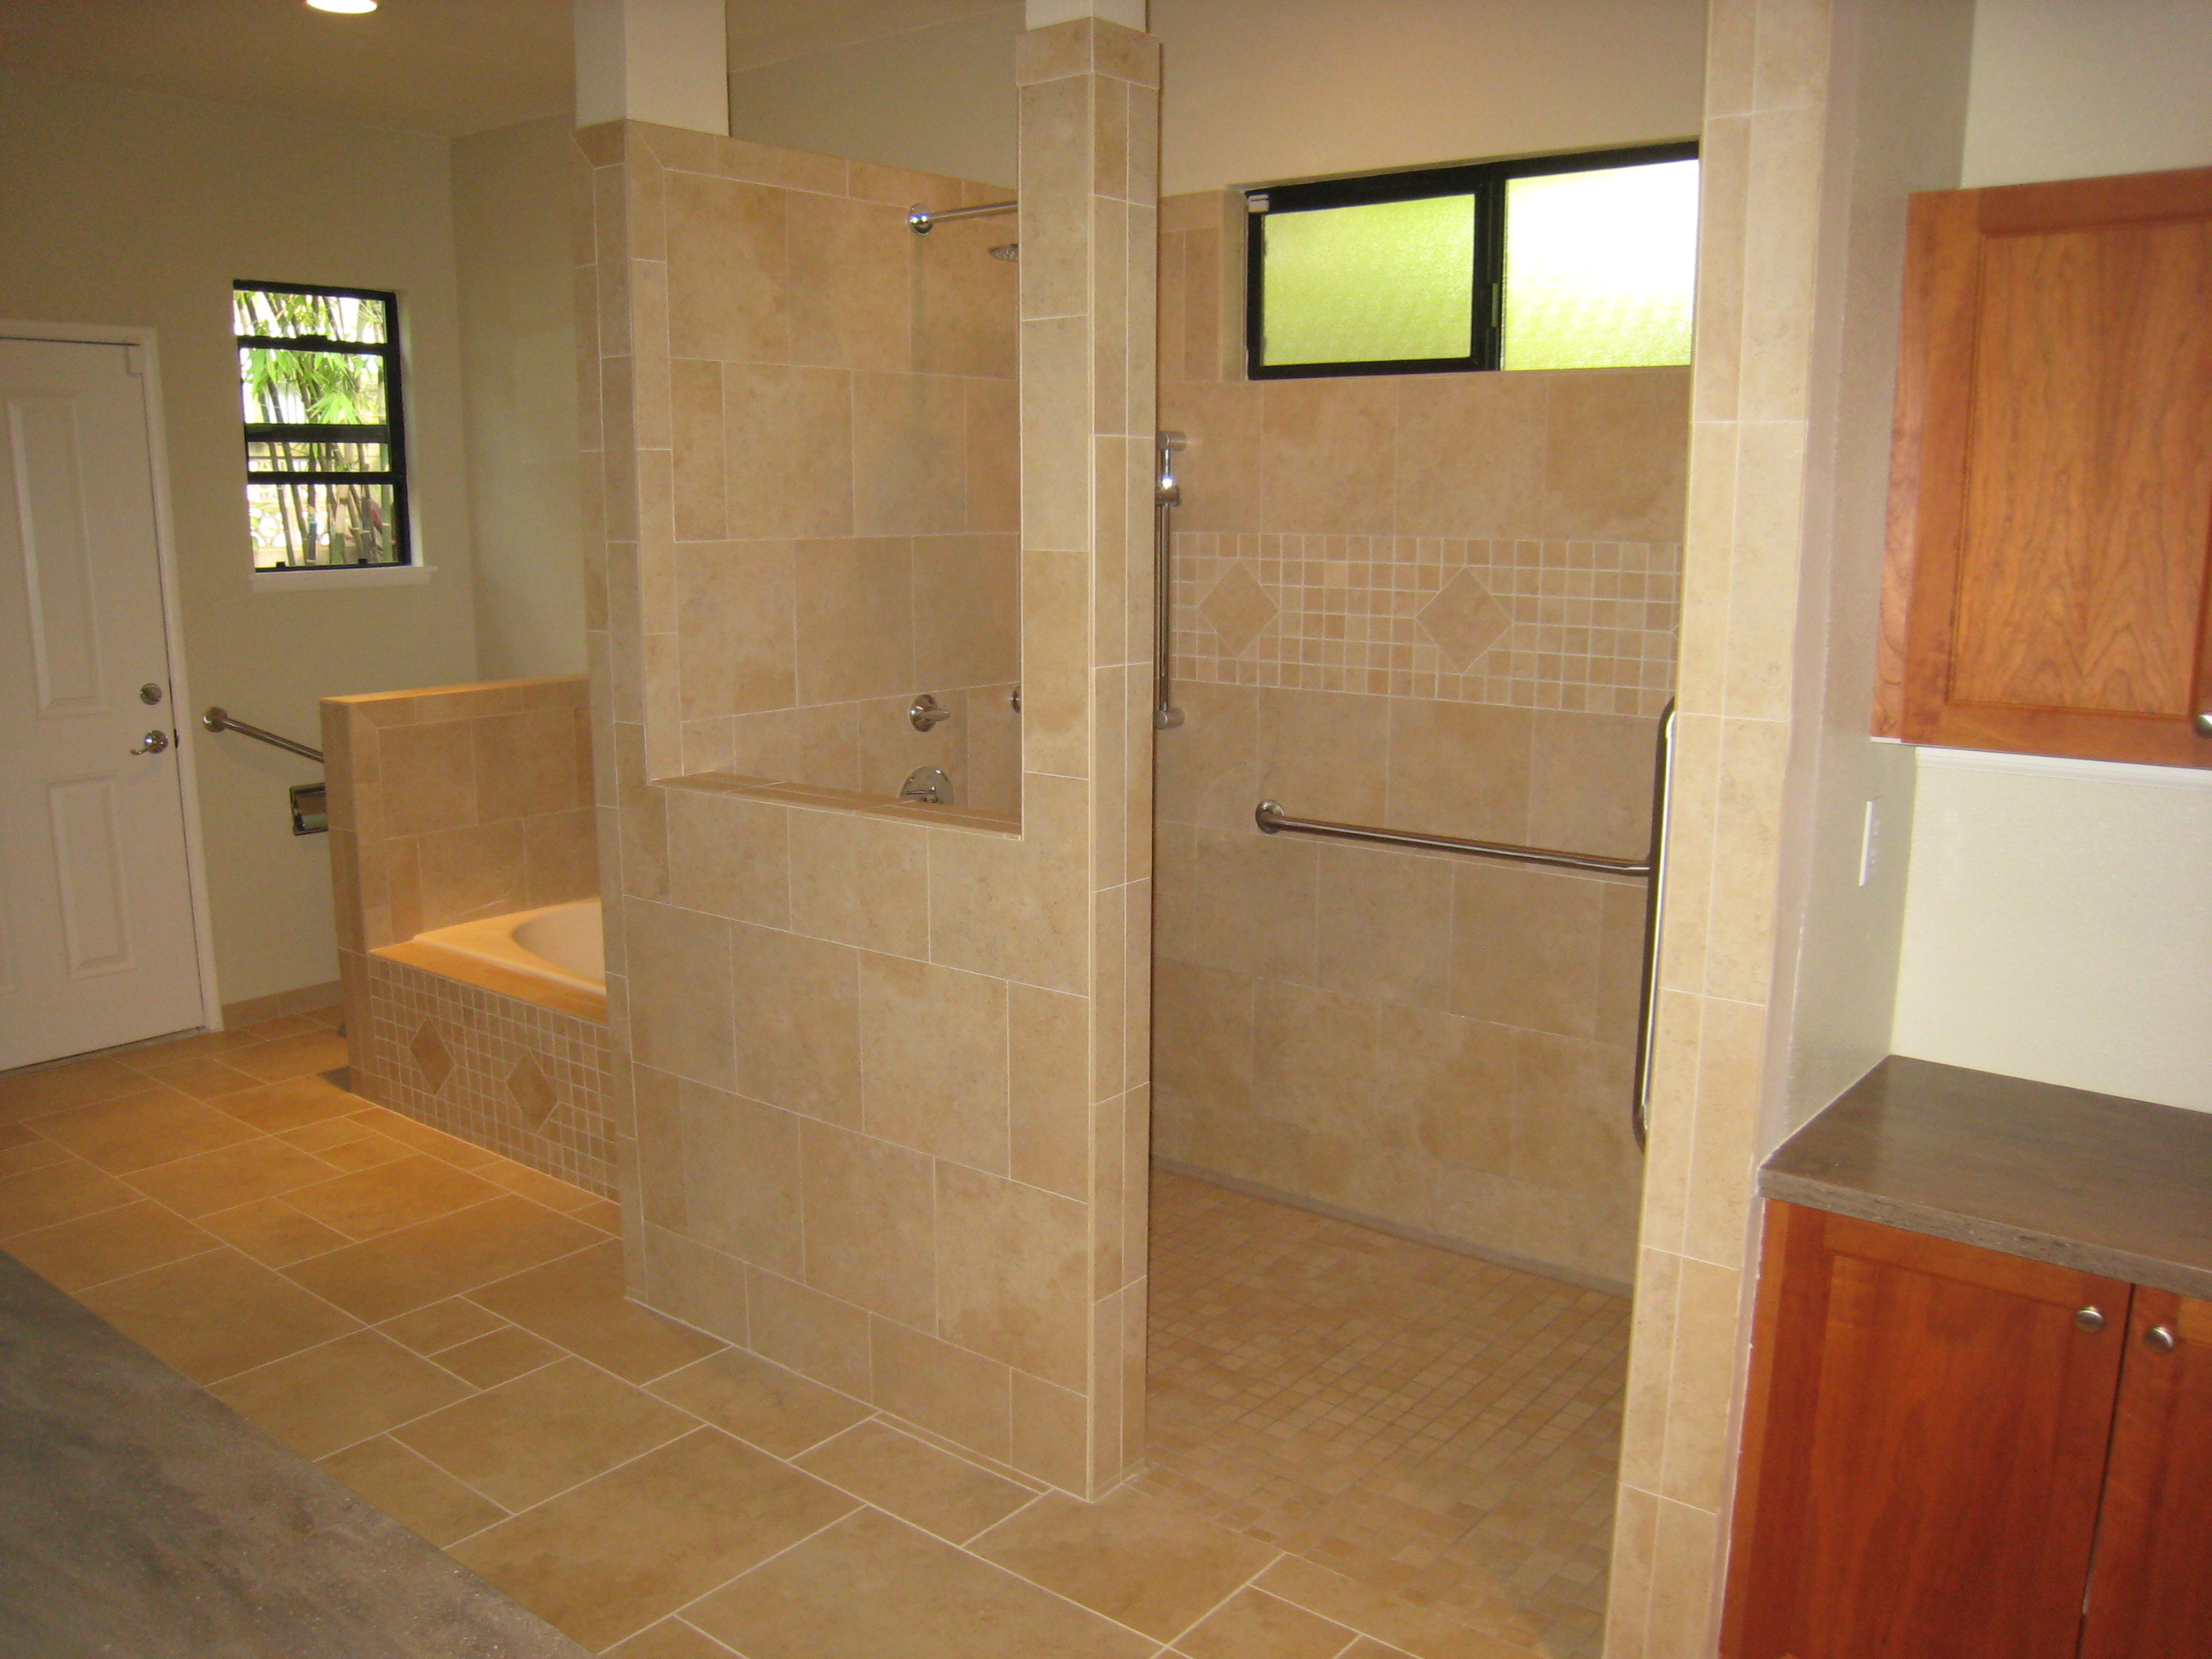 The Aging-in-place Bathroom